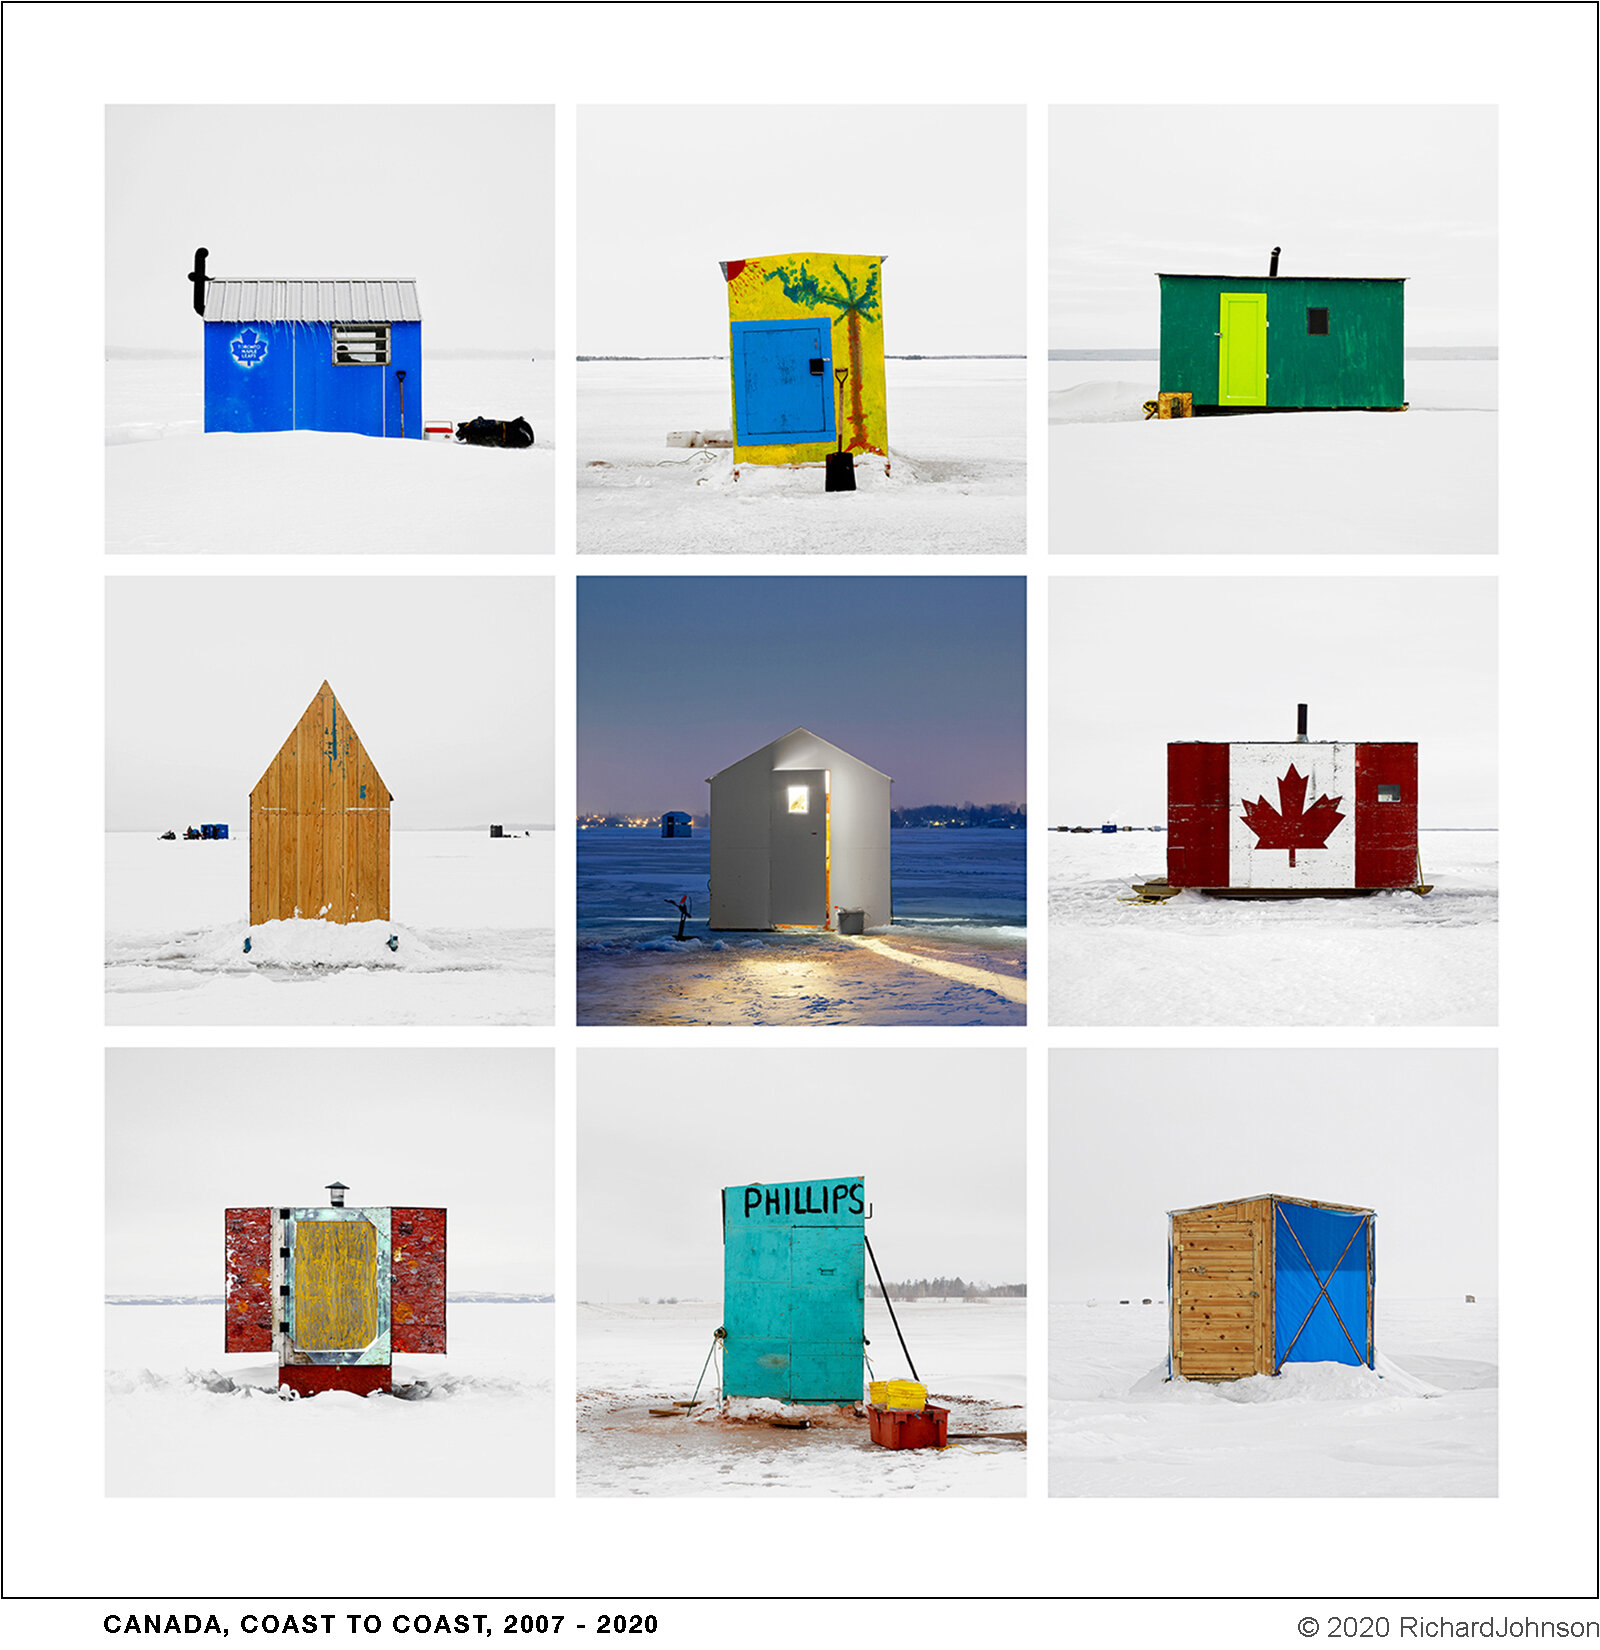 Ice Huts Grid # 11, Various Locations, Canada